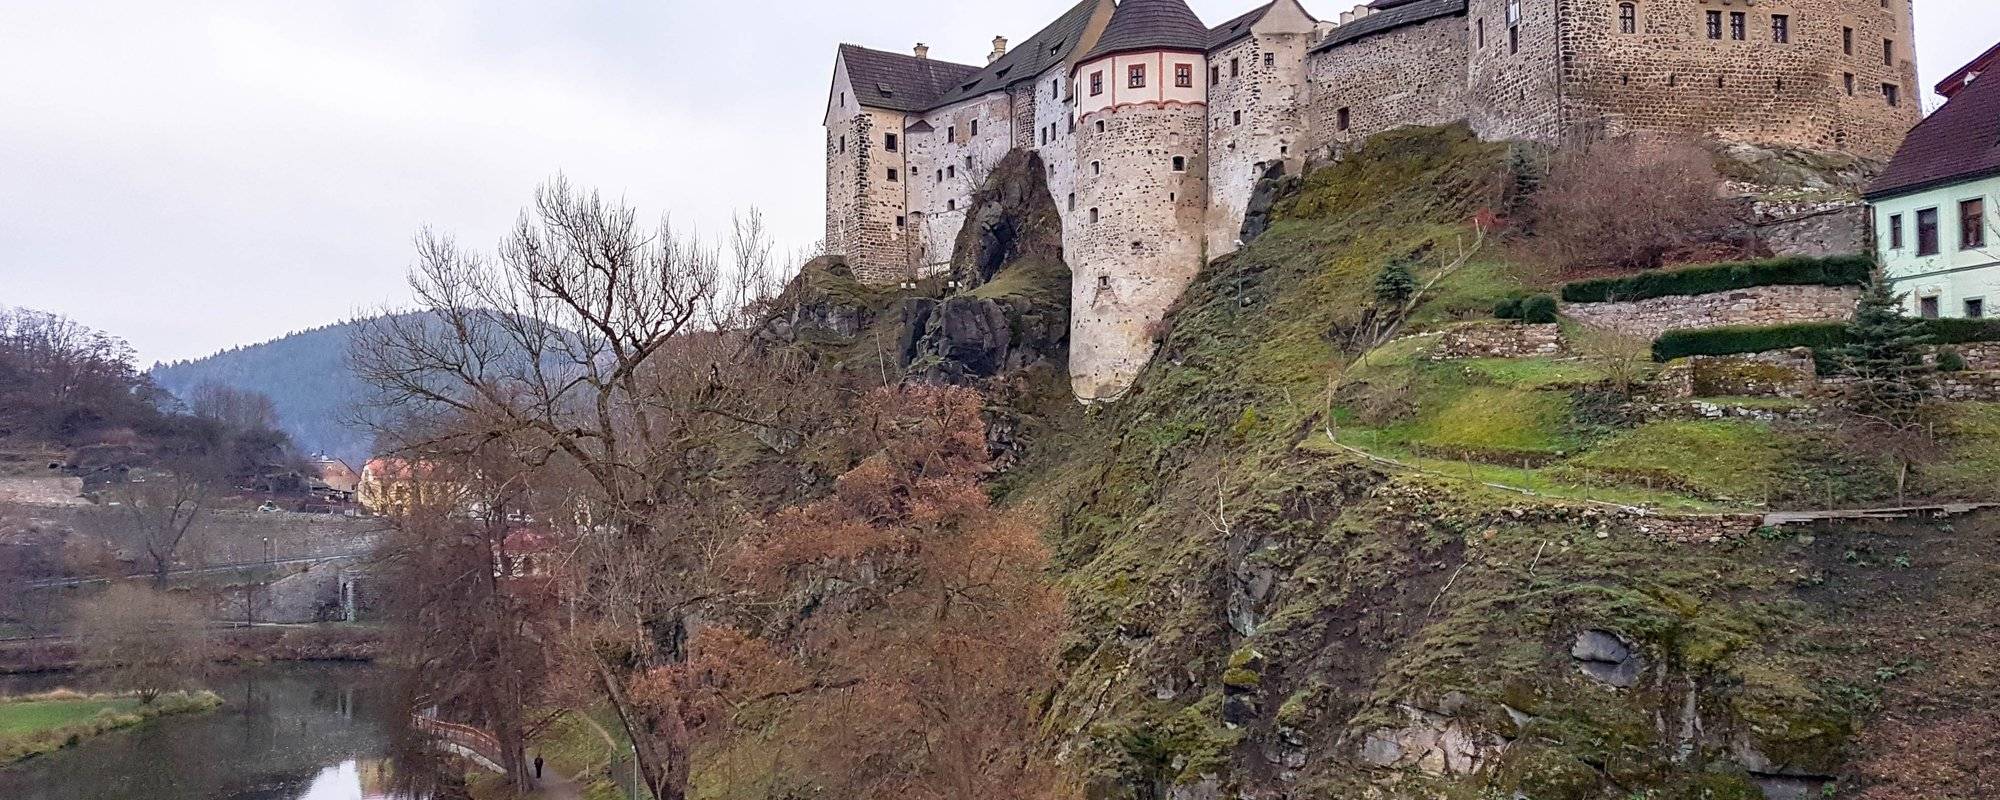 Travel adventures - Castle Loket and the dark side of history